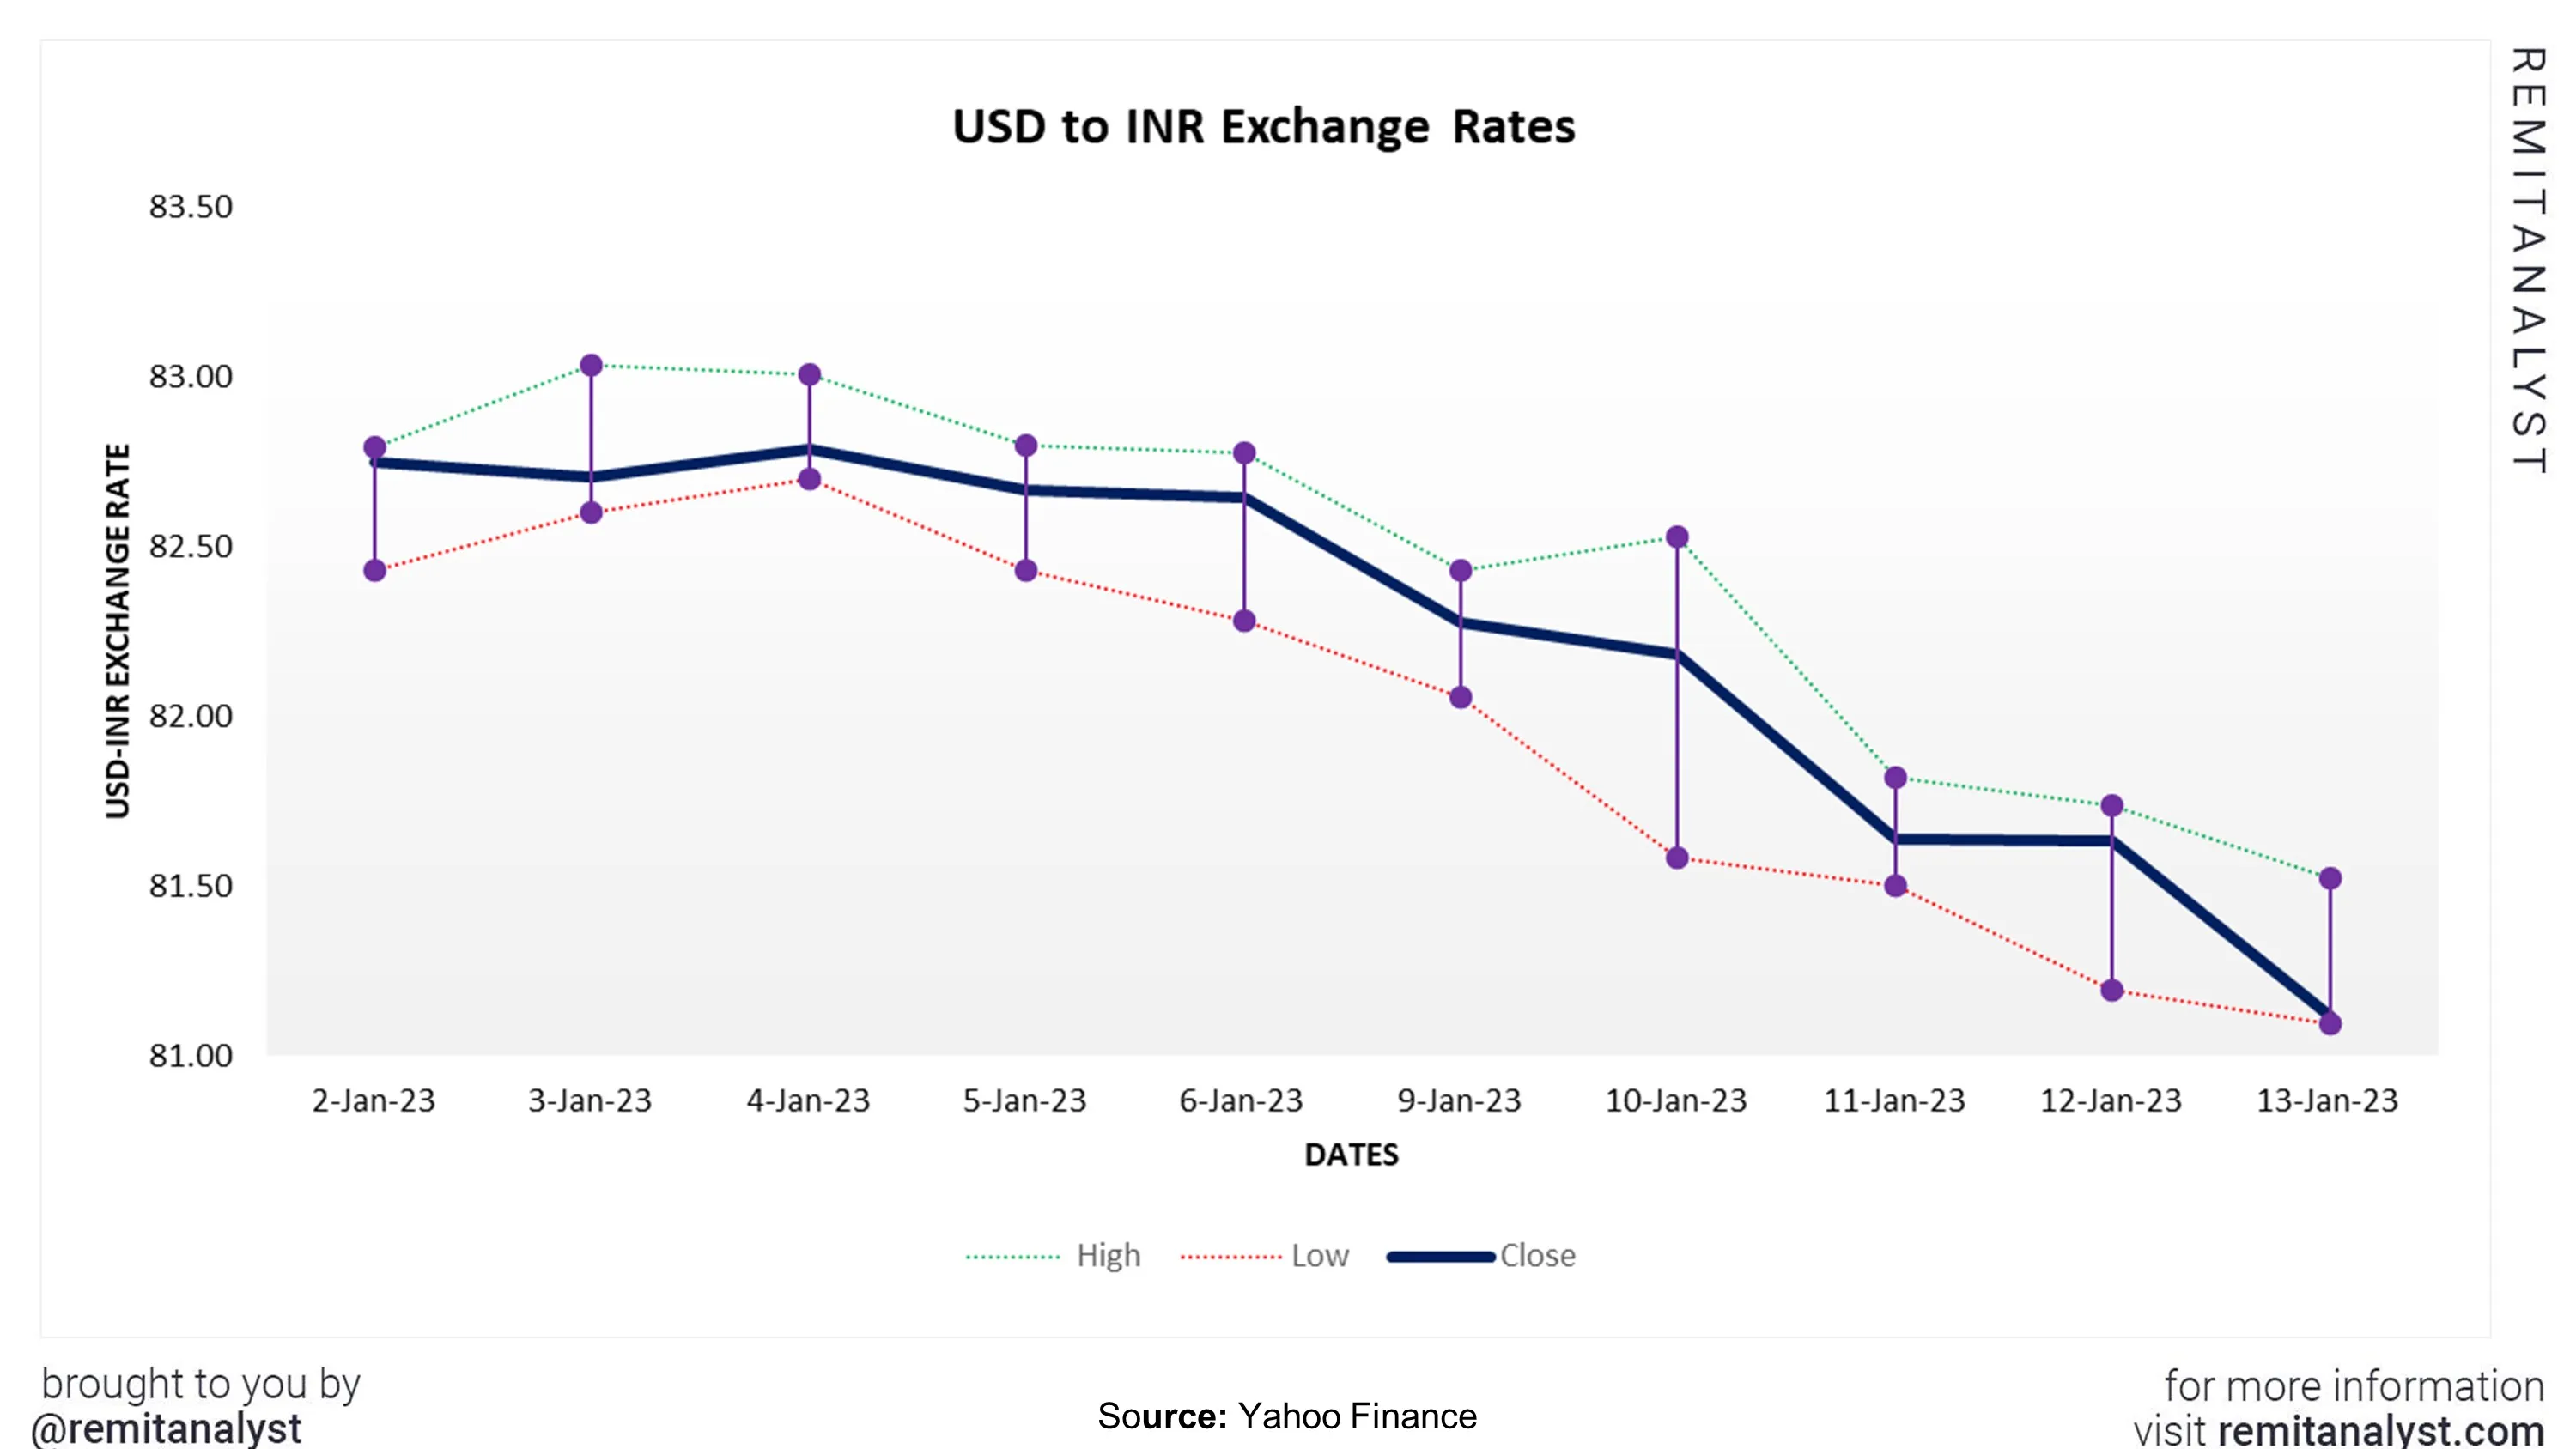 usd-to-inr-exchange-rate-from-2-jan-2023-to-13-jan-2023